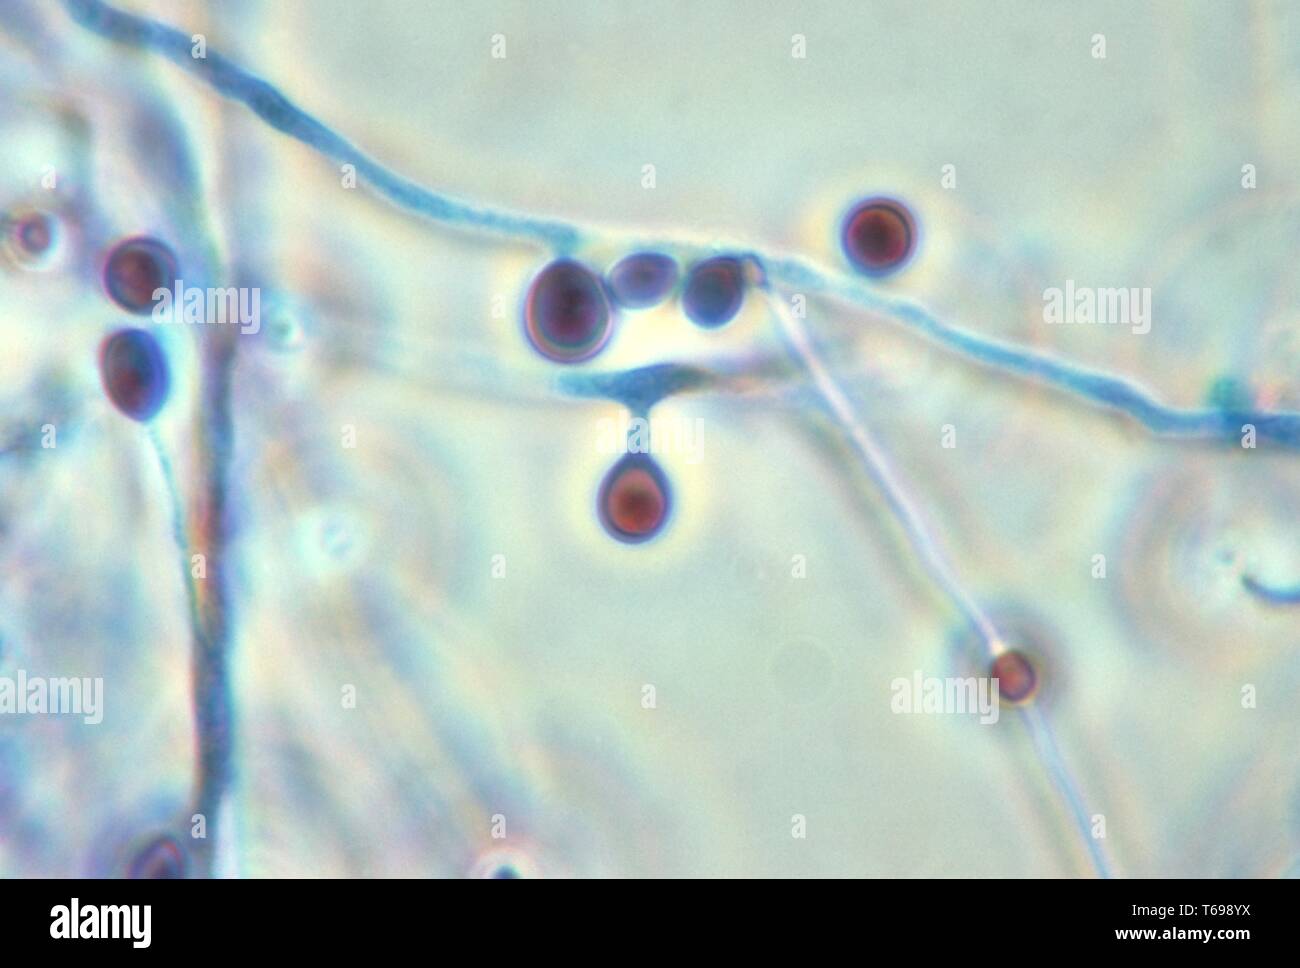 Photomicrograph of the conidiophore and conidia of the fungus Pseudallescheria boydii, 1970. Image courtesy Centers for Disease Control and Prevention (CDC). () Stock Photo